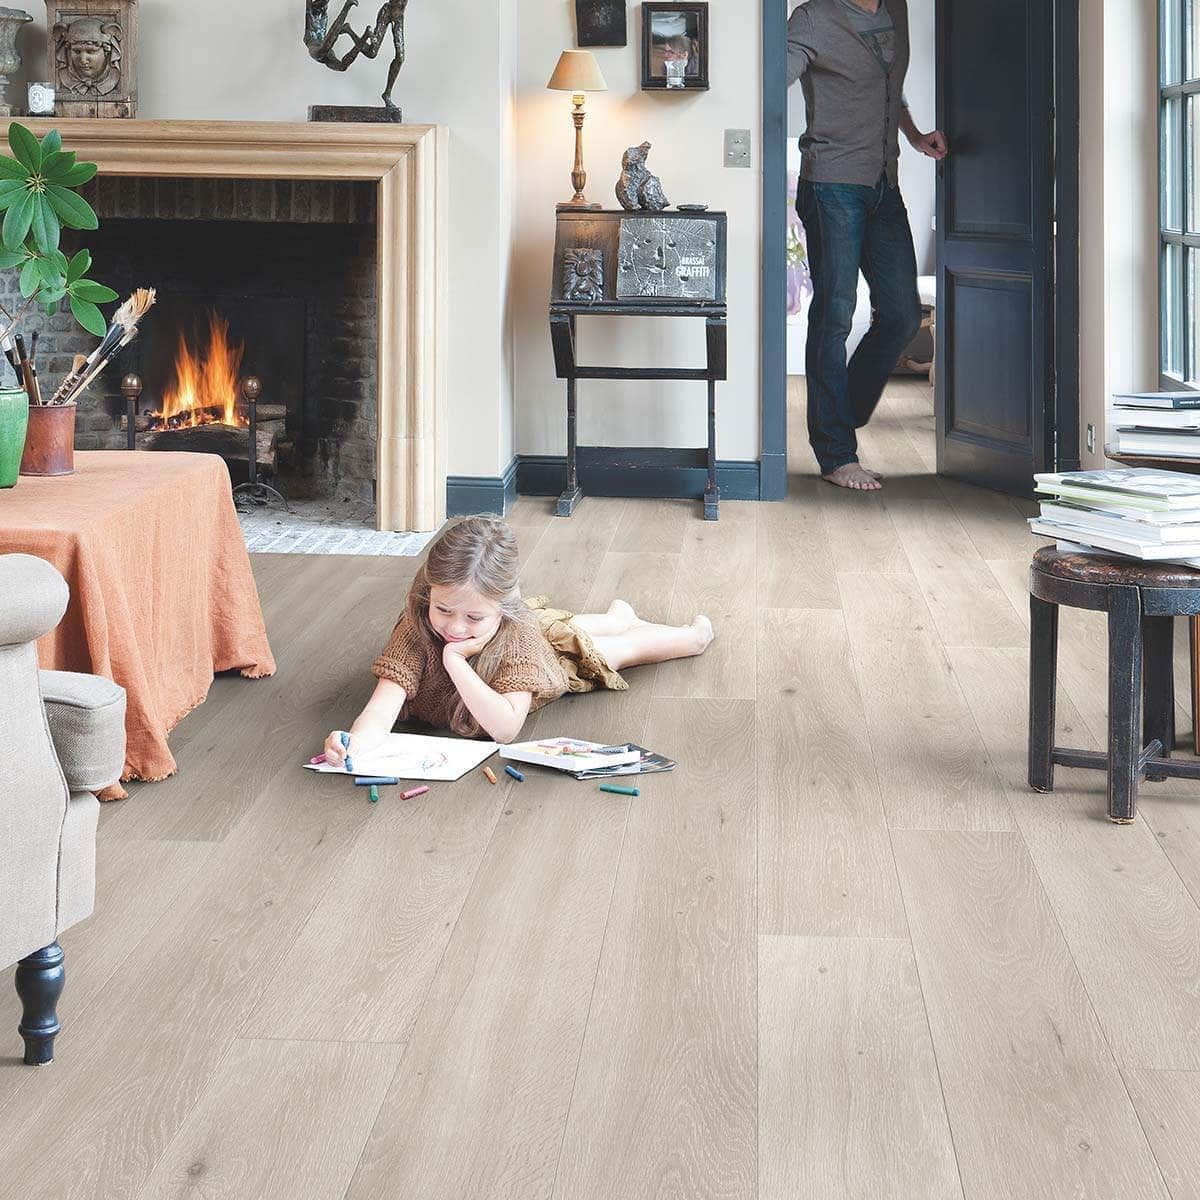 Should you opt for laminated wooden
  flooring?